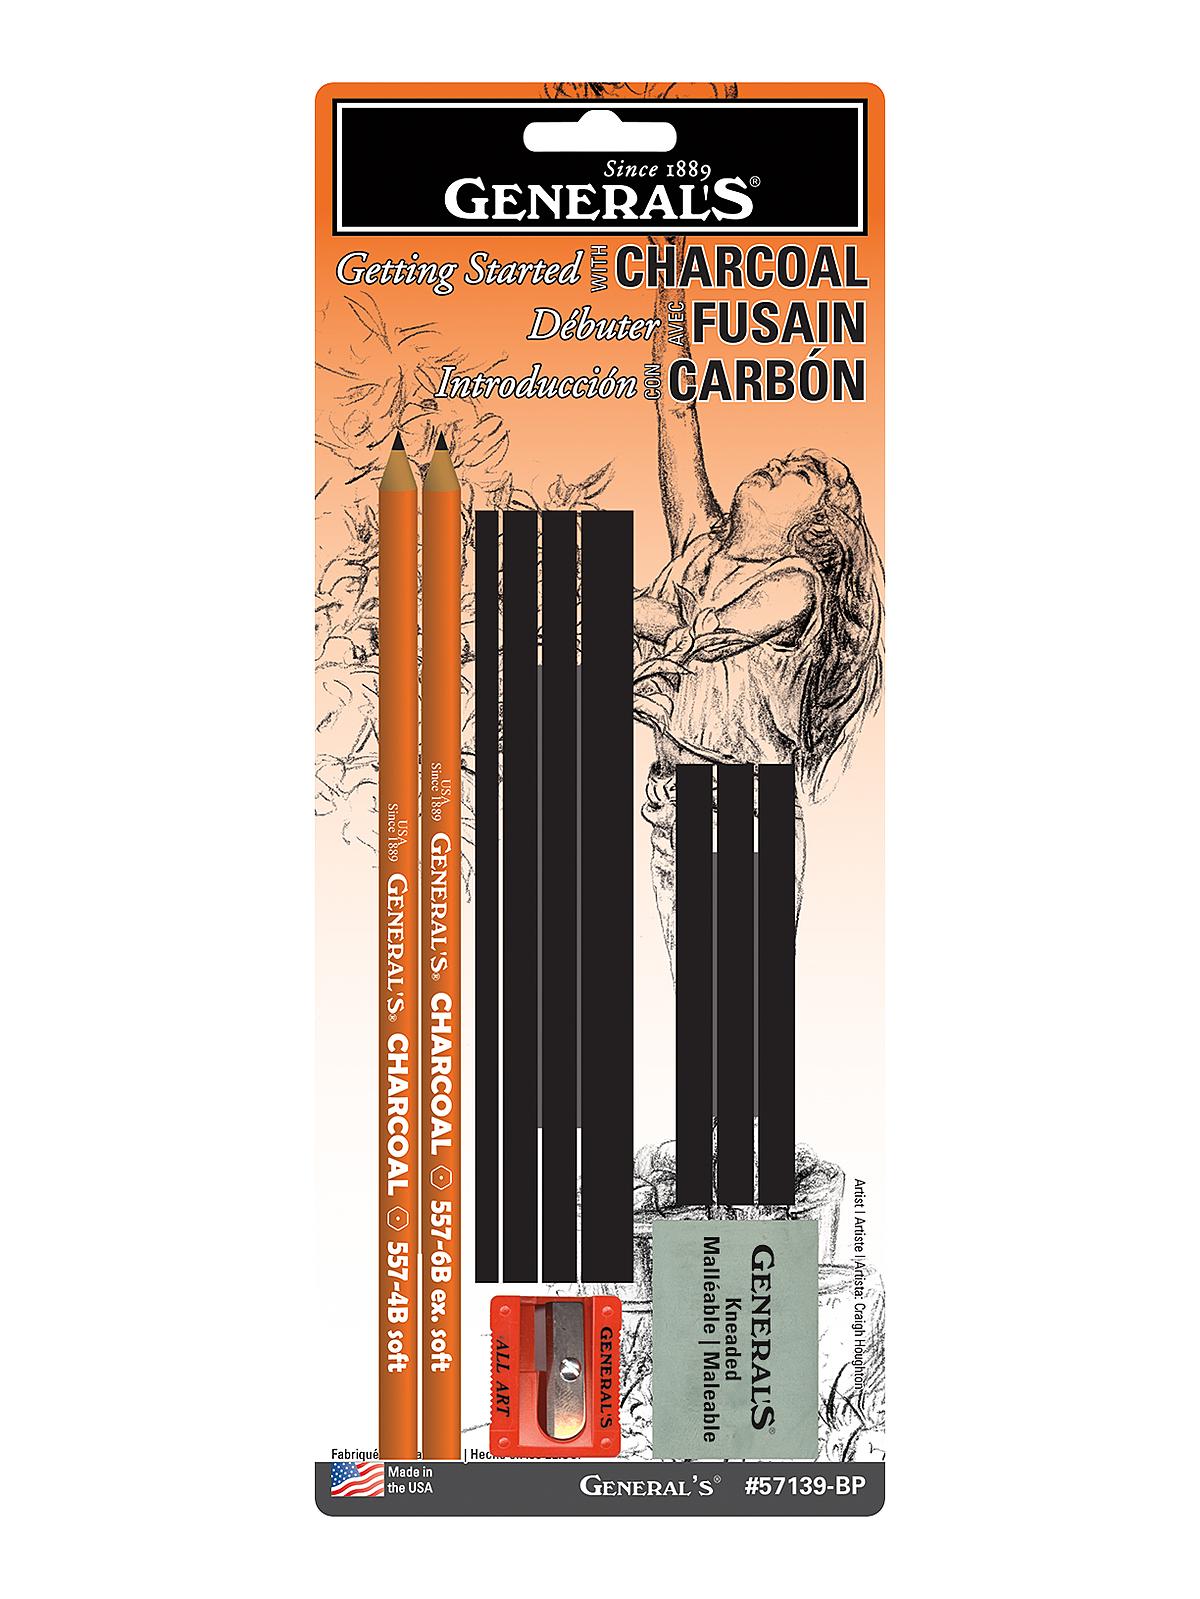 Getting Started With Charcoal Set Each